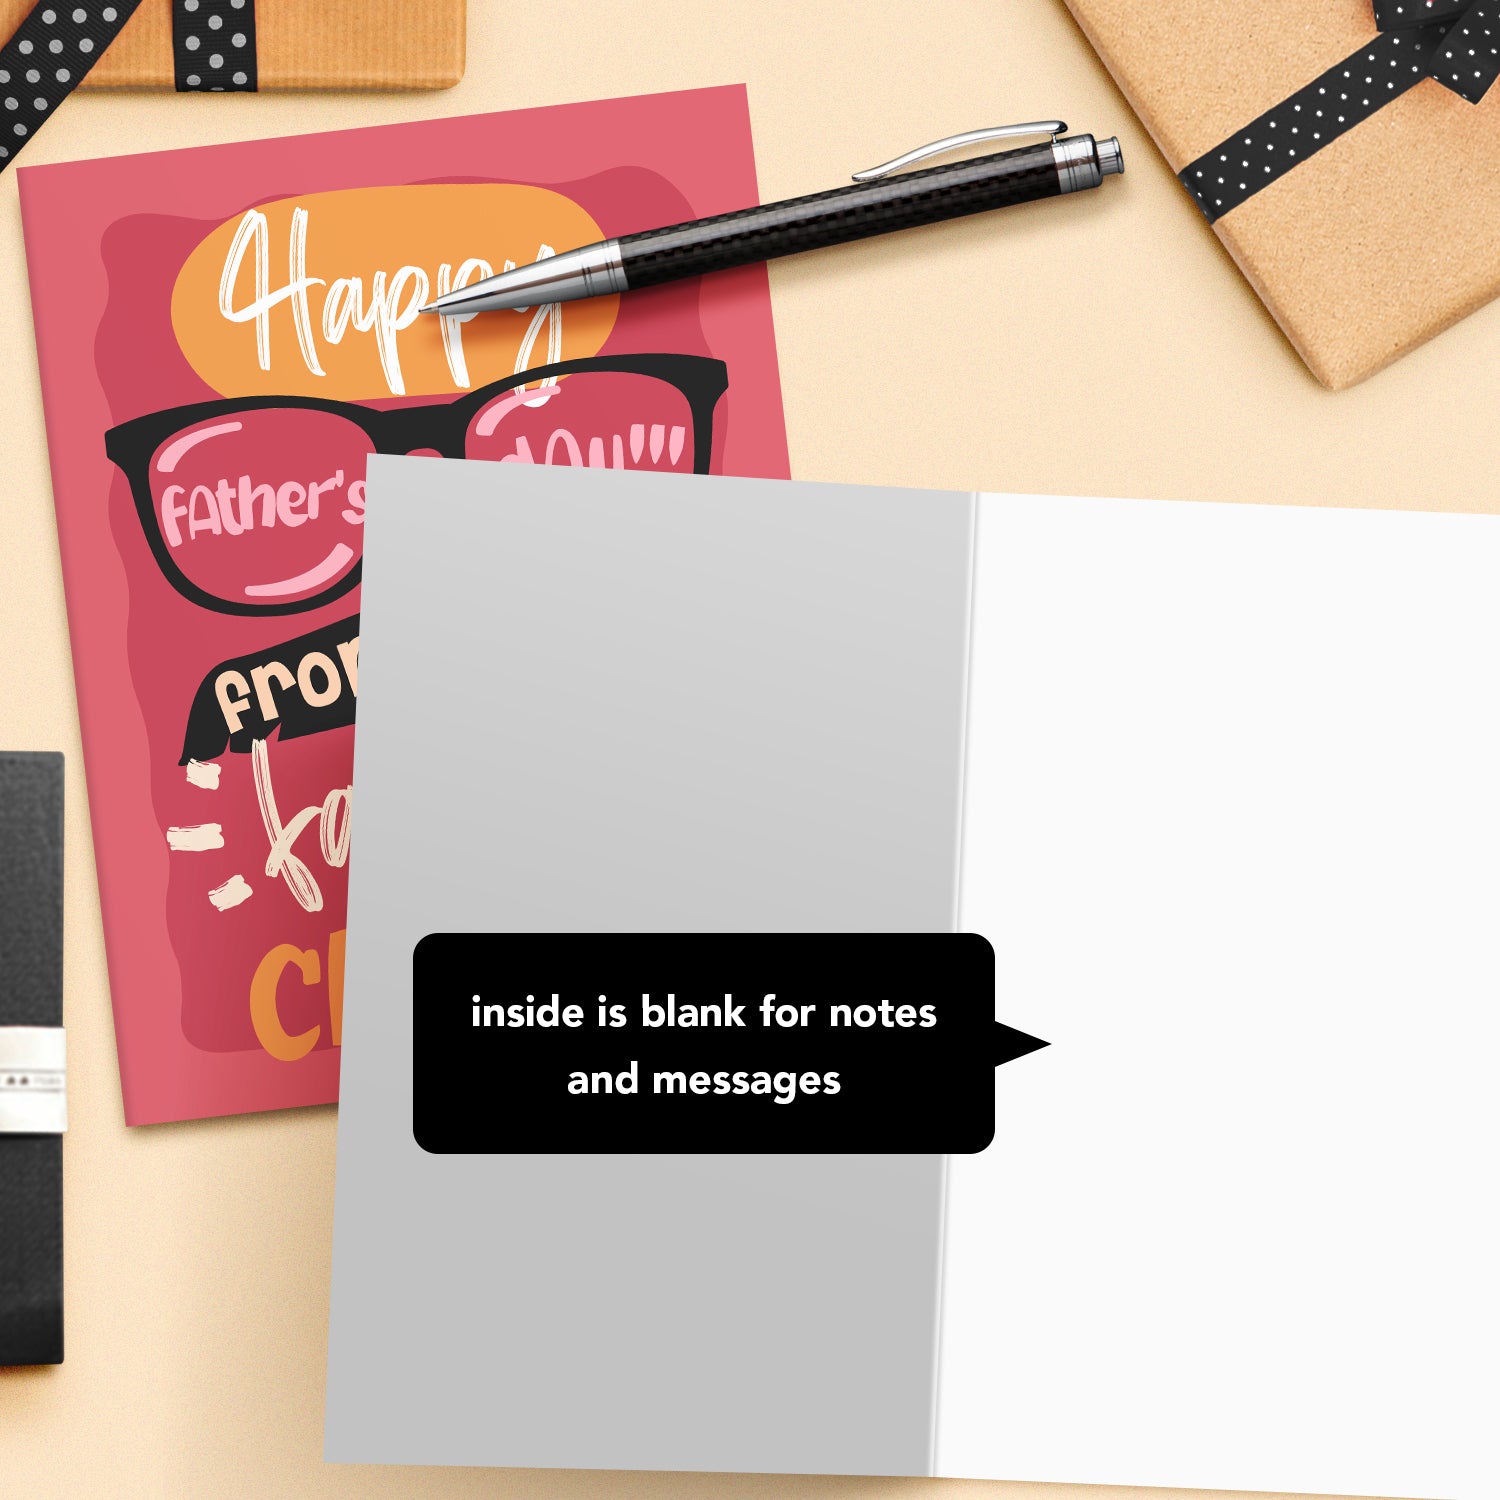 Happy Father's Day from Your Favorite Child Greeting Cards and Envelopes for Dad, Stepdad | 8.5 x 11 | 2 per Pack